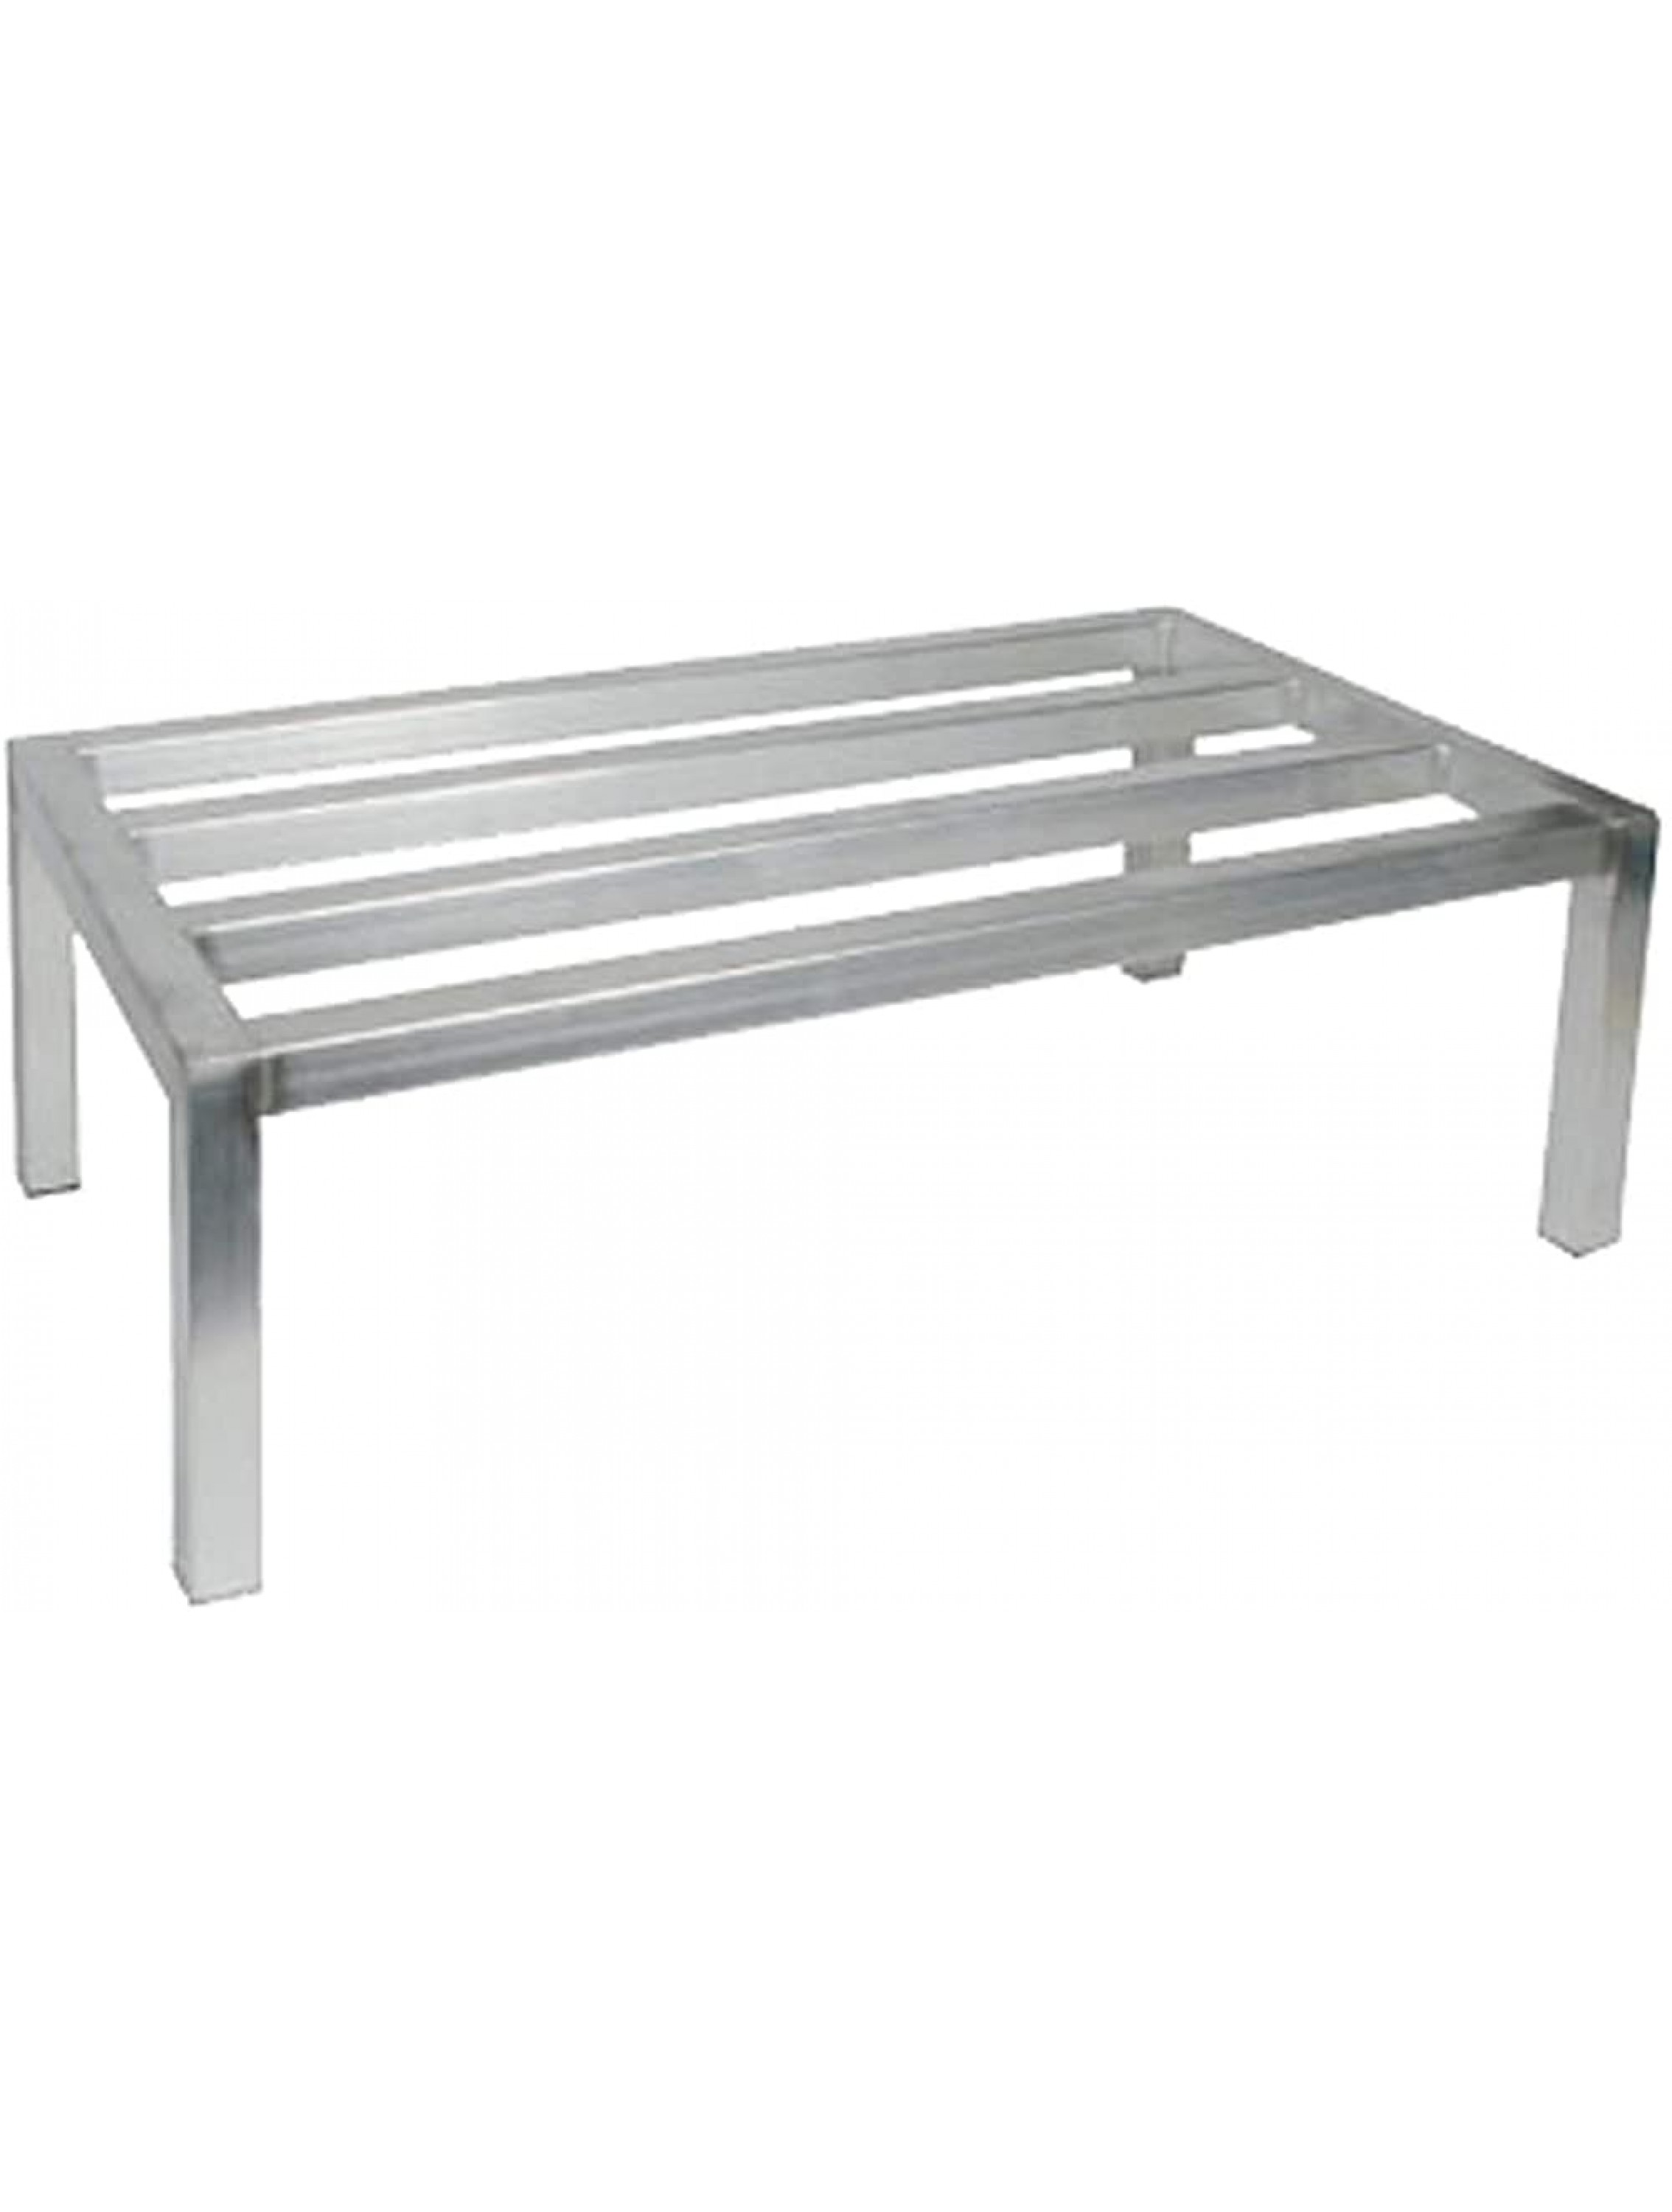 Winco 20-Inch by 36-Inch Dunnage Rack 12-Inch High 1800-Pound Capacity - B7DL4F95V